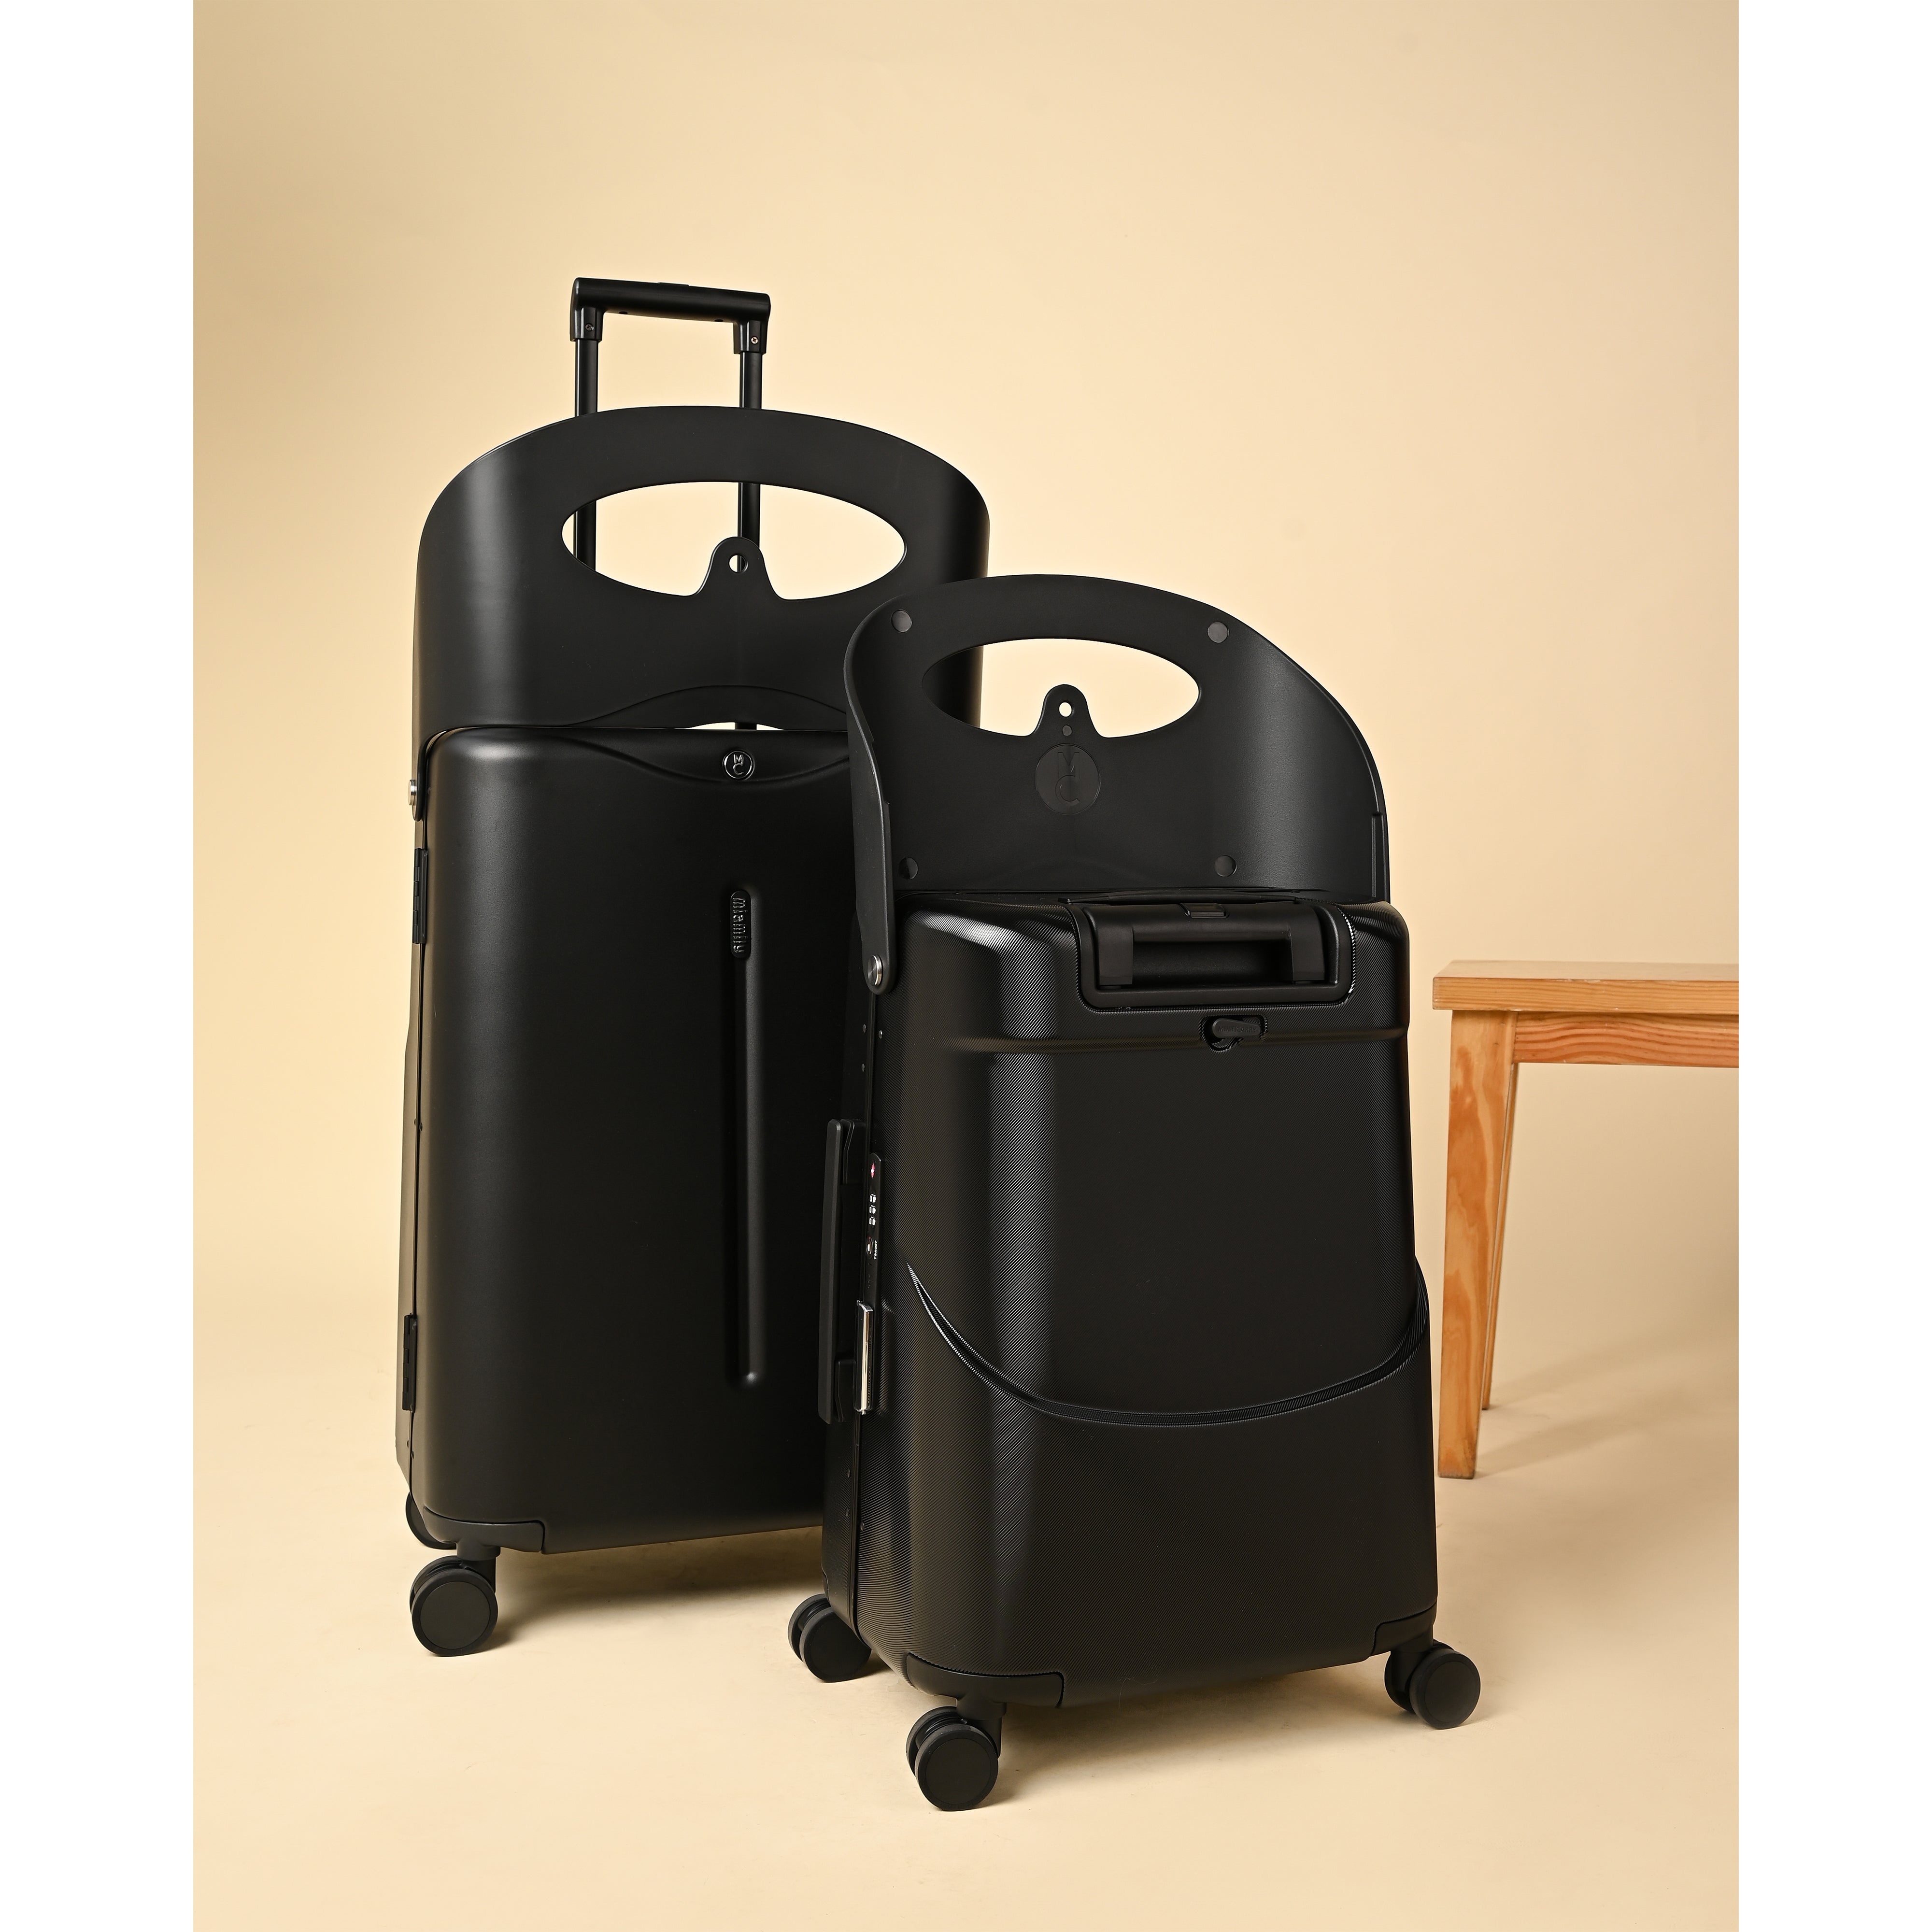 Miamily Midnight Black Ride-On Trolley Carry-On Luggage 18 inches